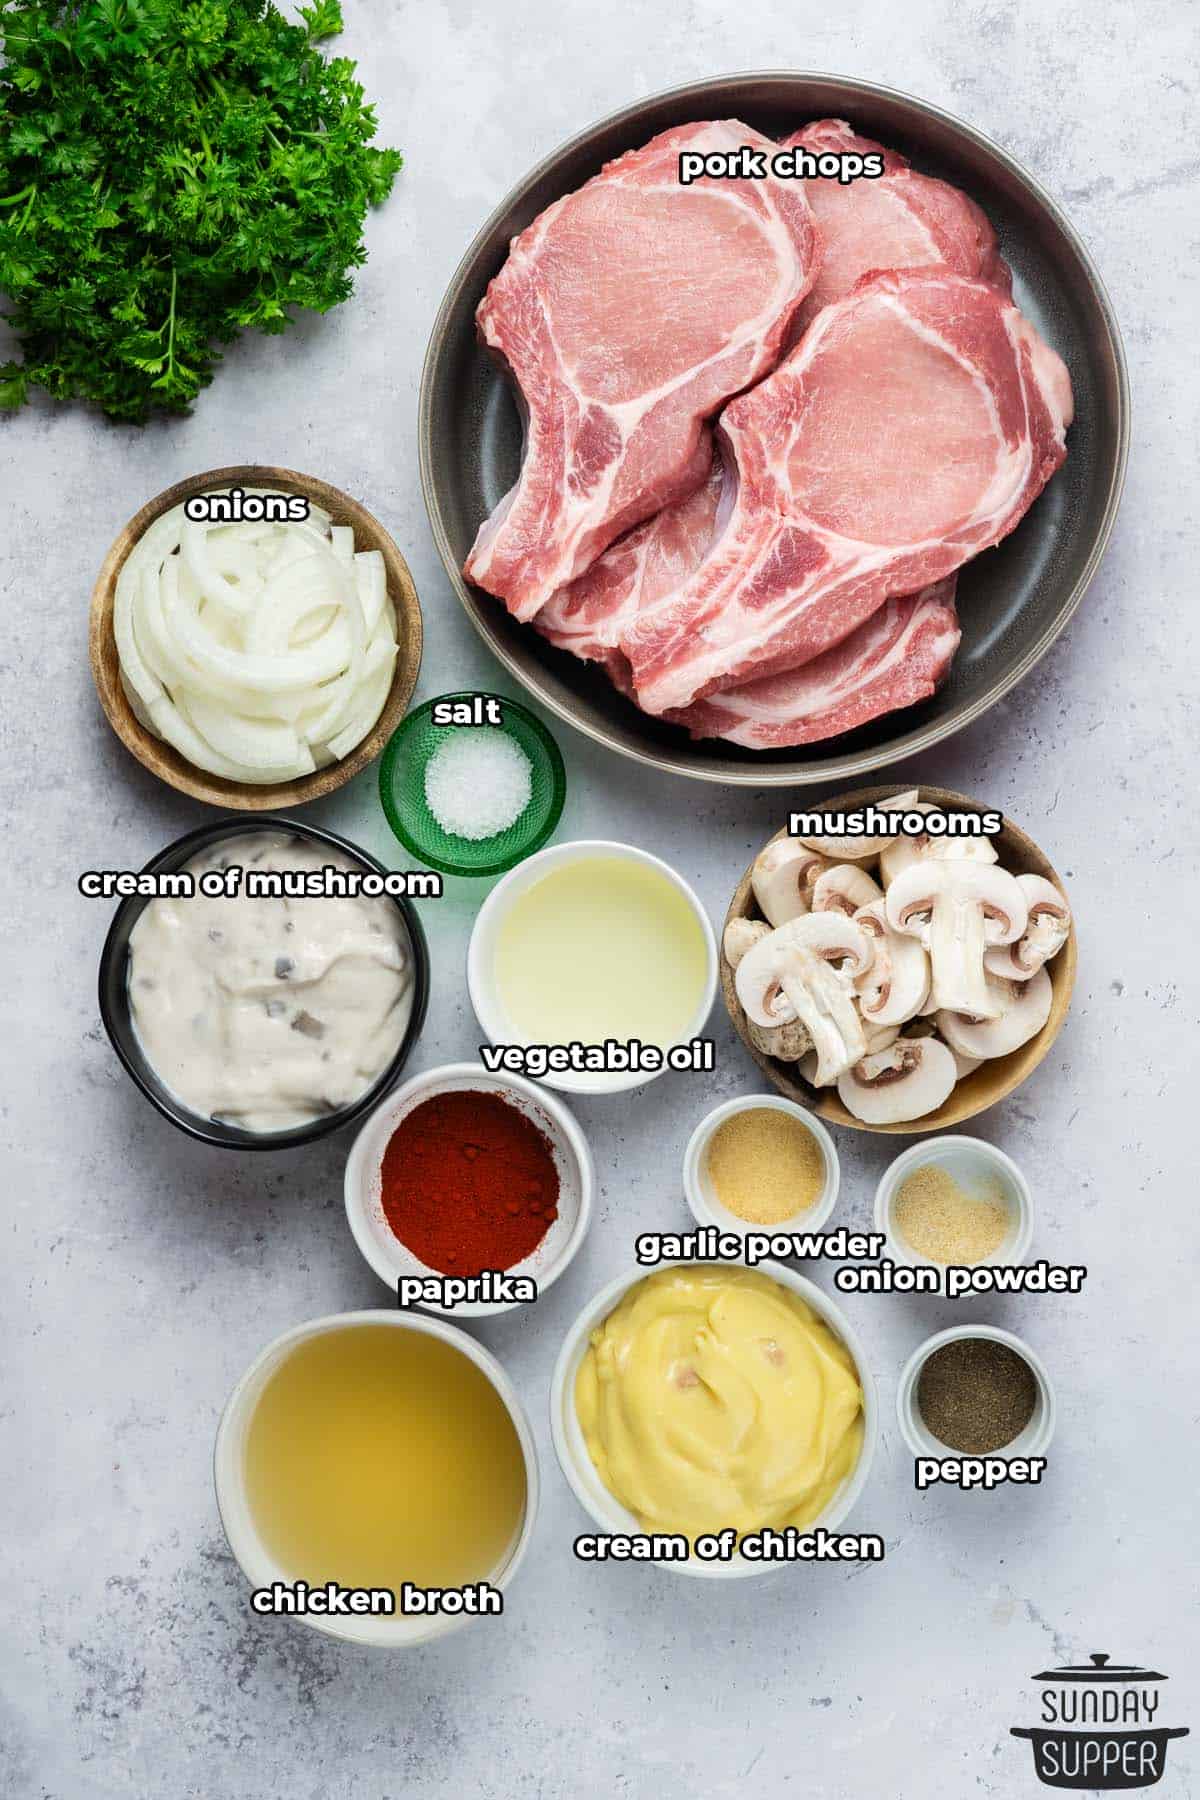 all the ingredients for smothered pork chops with labels